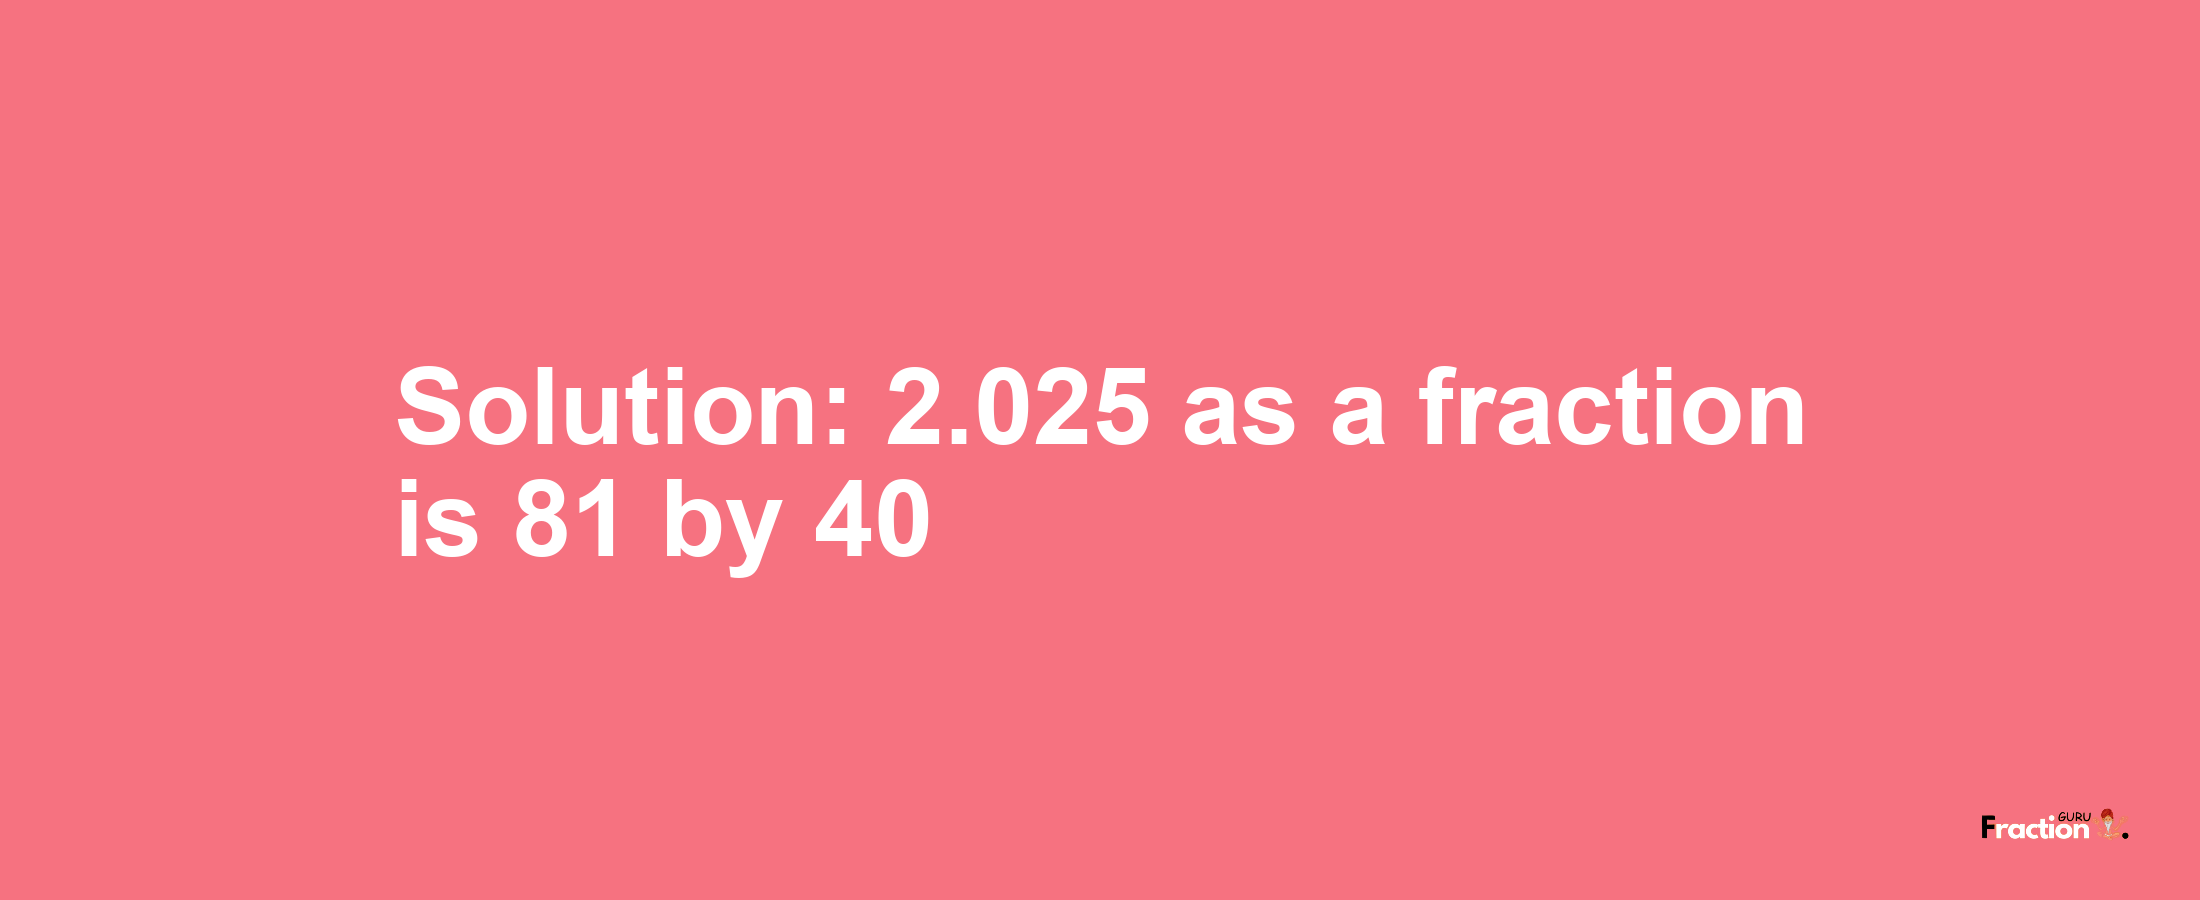 Solution:2.025 as a fraction is 81/40